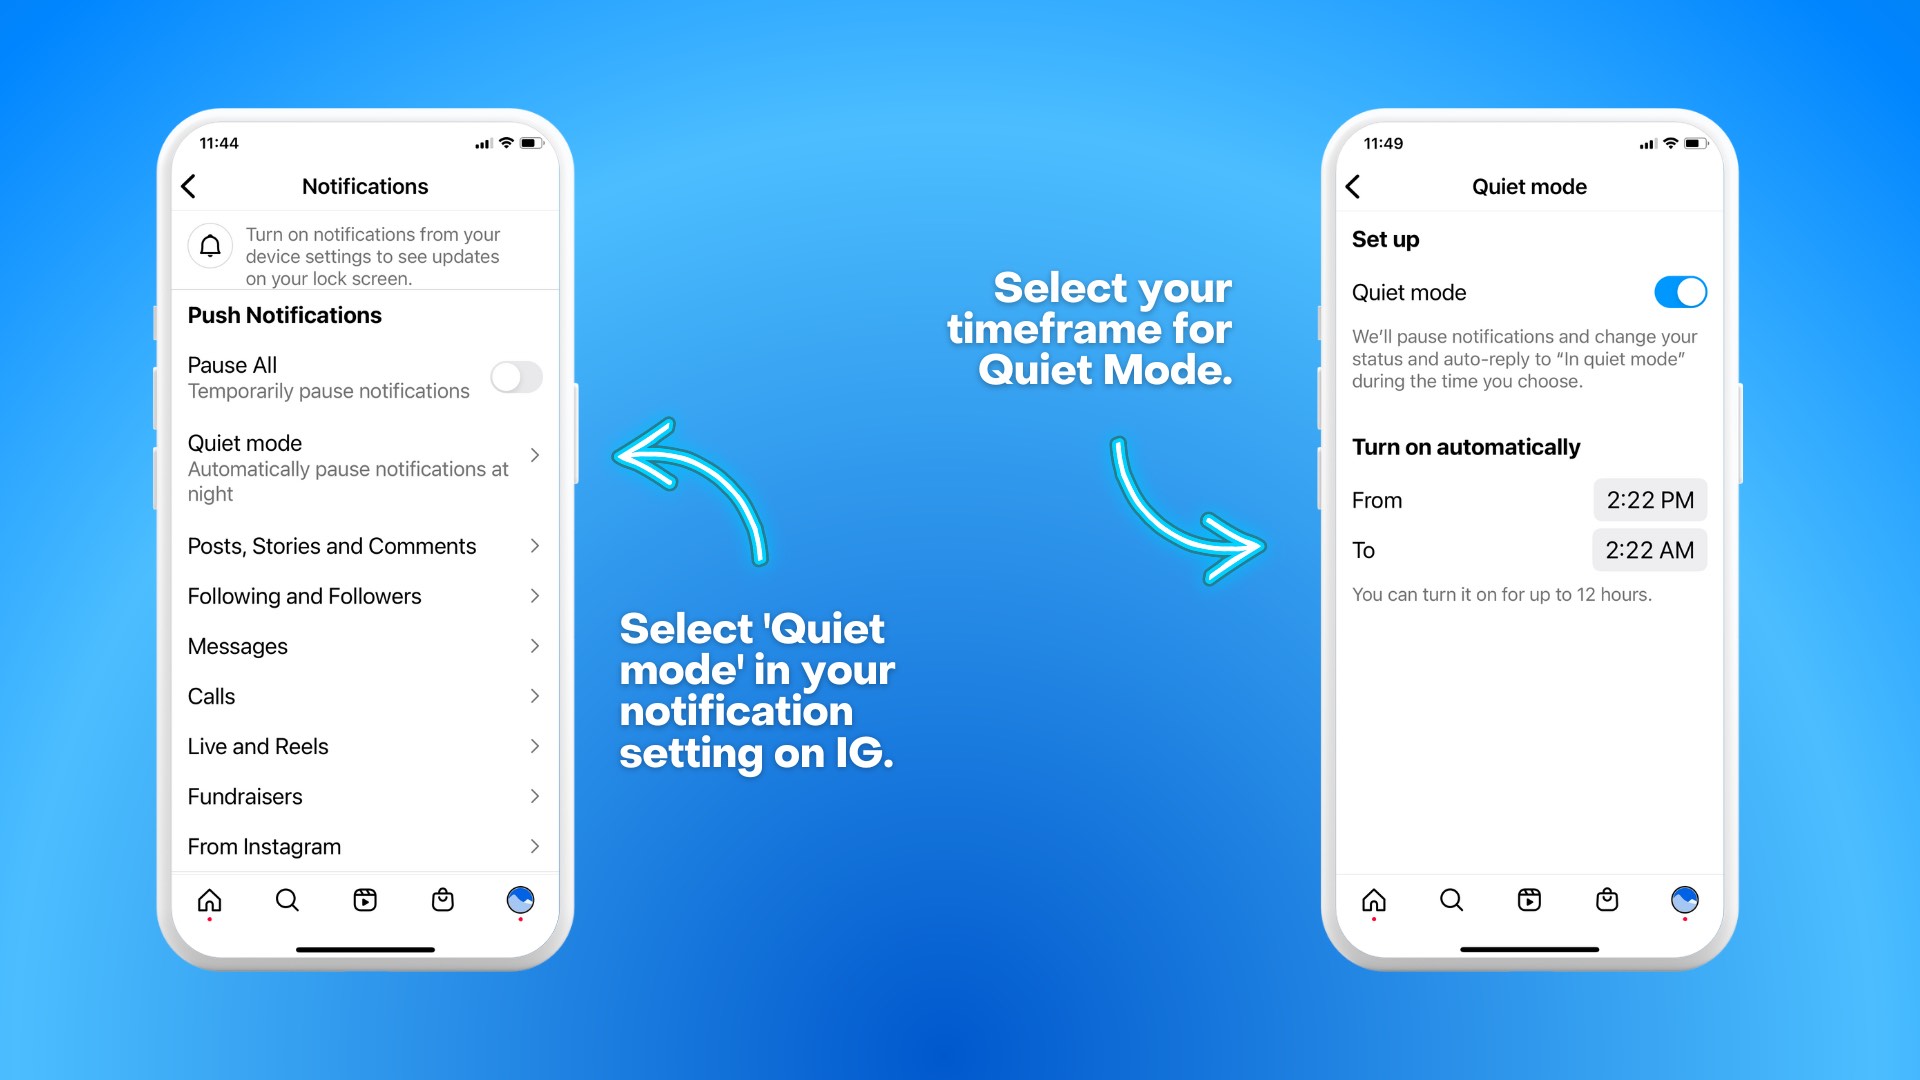 How to turn off Quiet Mode on IG